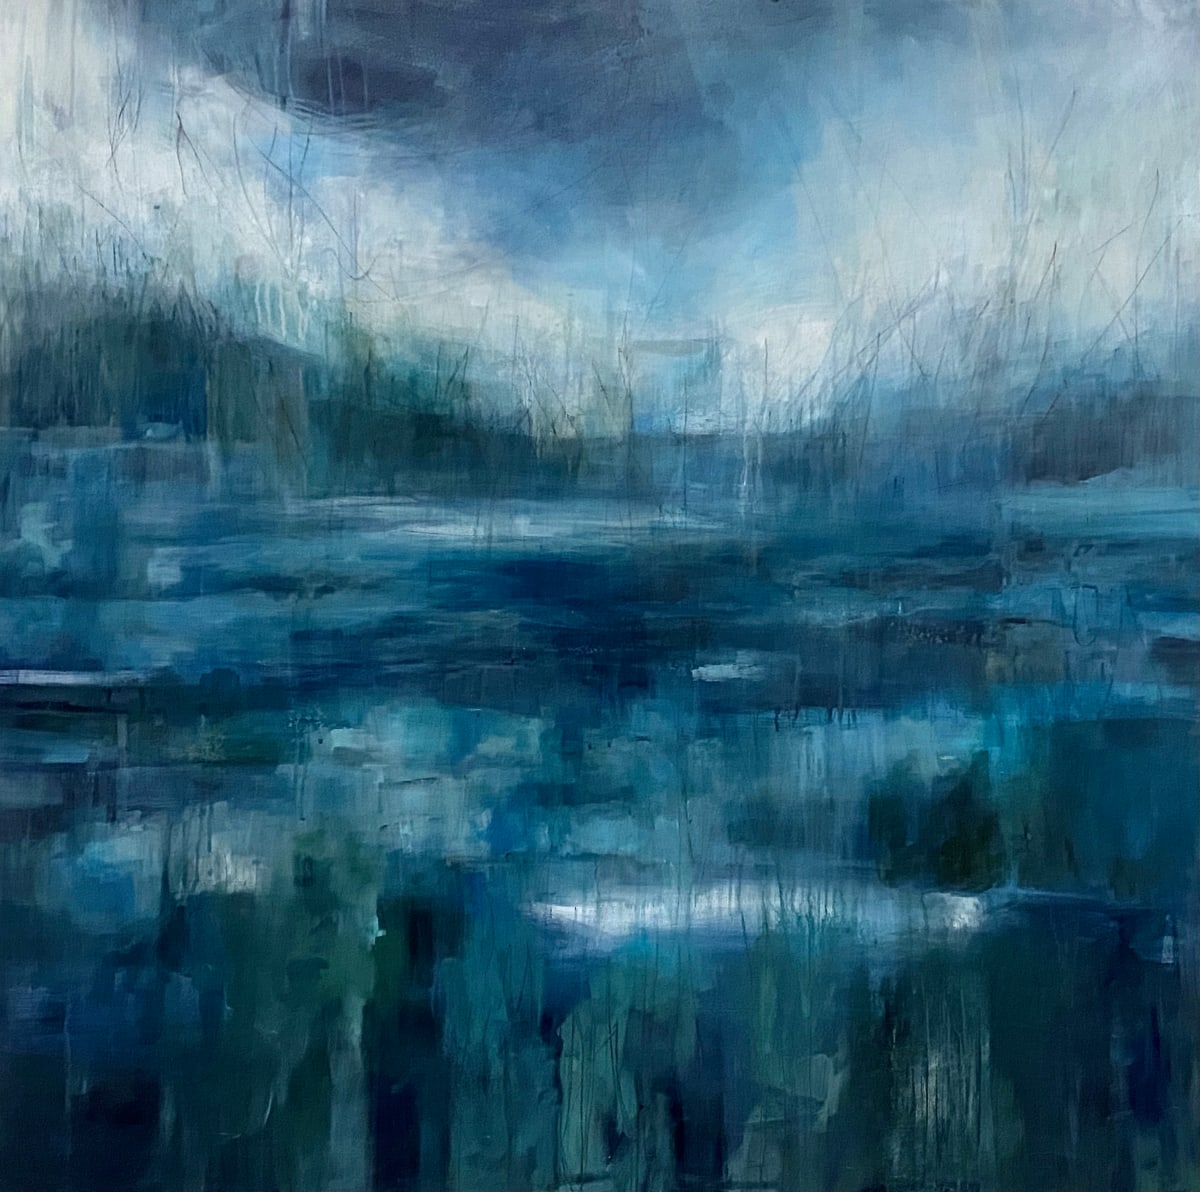 The Hidden Pool by Jo York  Image: The Hidden Pool: an abstracted response to a deep pool, tucked away and little known. Made in a great many layers of opaque and translucent acrylics, in rich blues and greens.